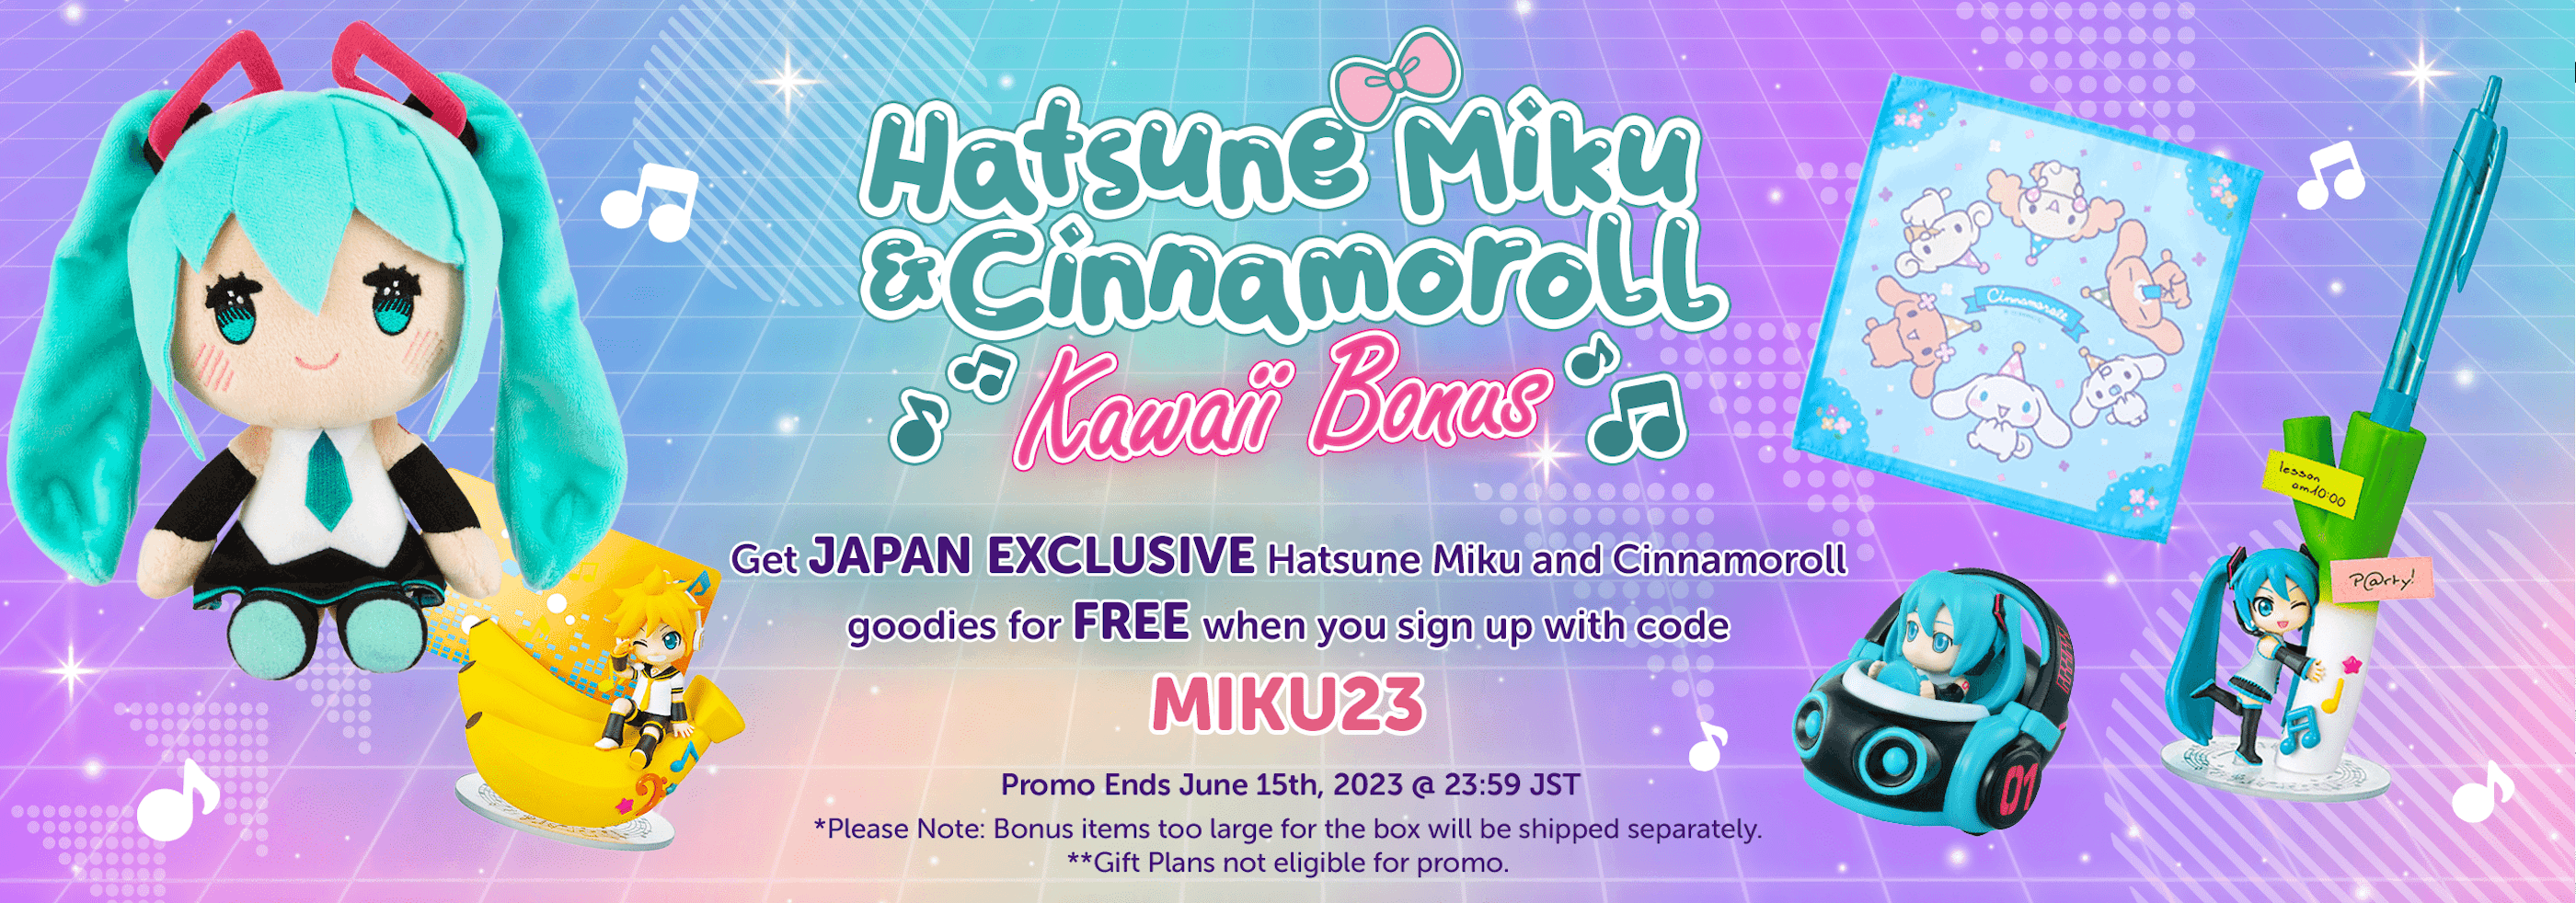 Get Japan exclusive Hatsune Miku and Cinnamoroll goodies for FREE when you sign up with code MIKU23.